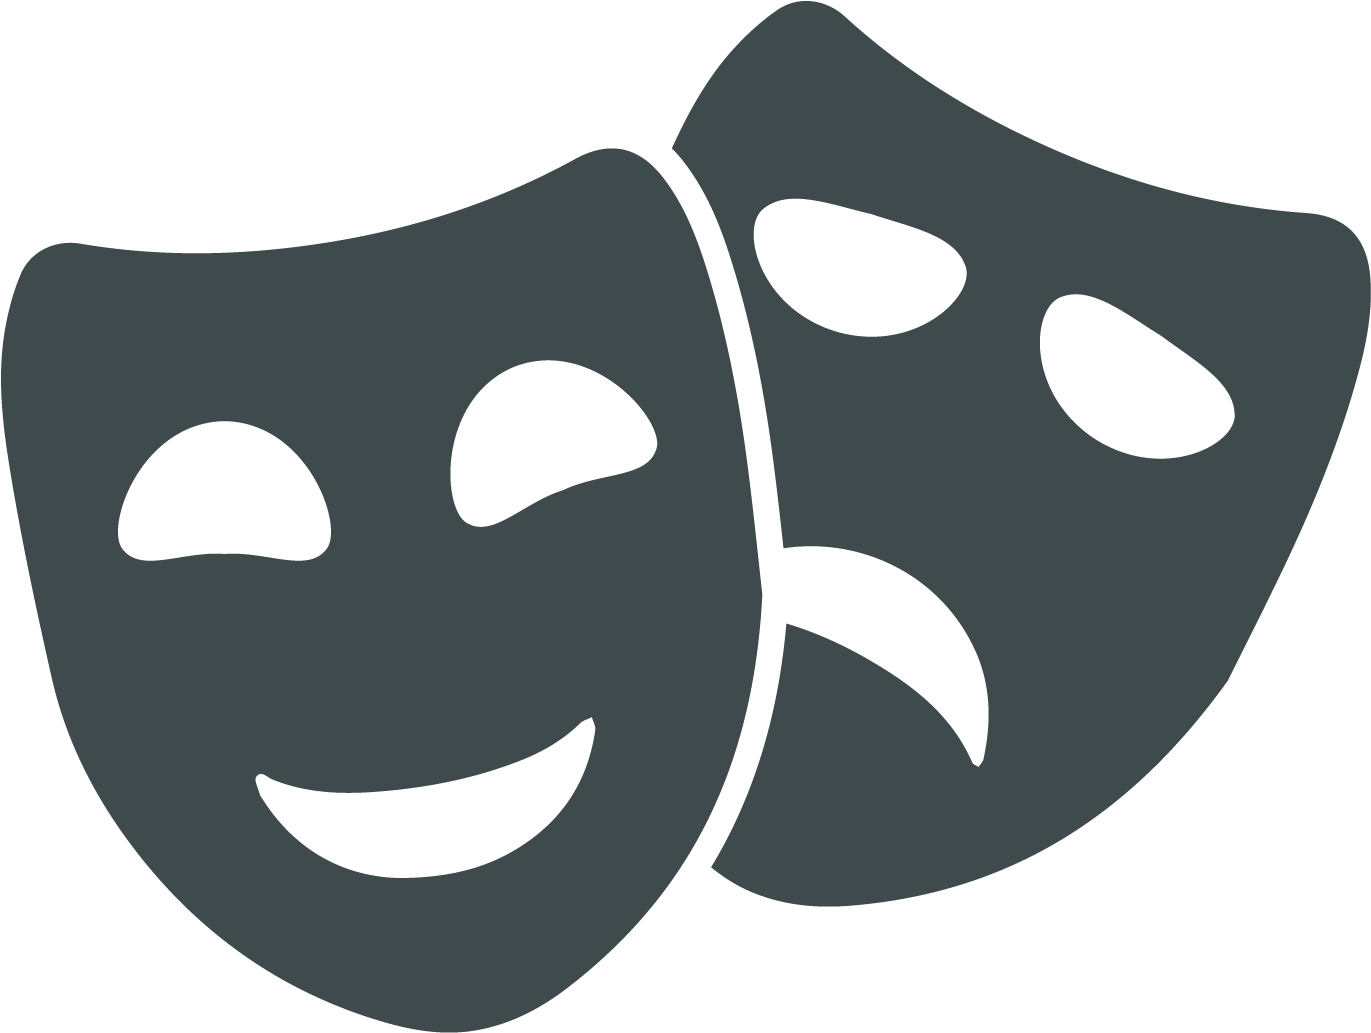 A Group Of Masks With Black Background